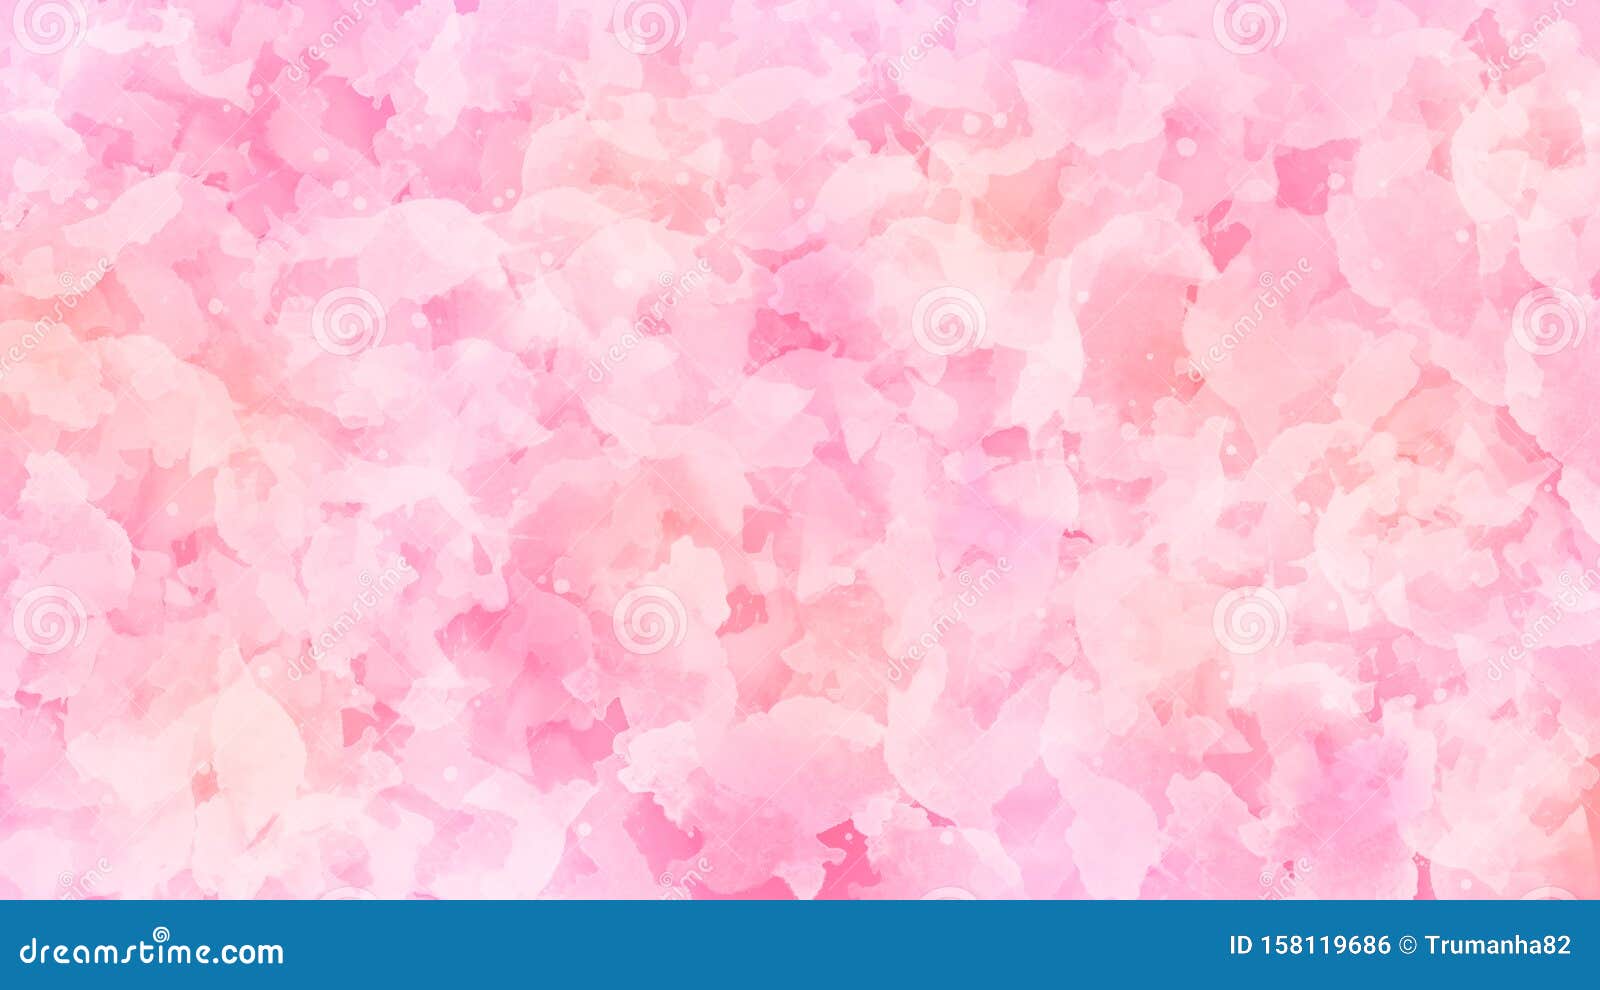 Pink Abstract Background with Watercolor Texture Stock Photo - Image of ...